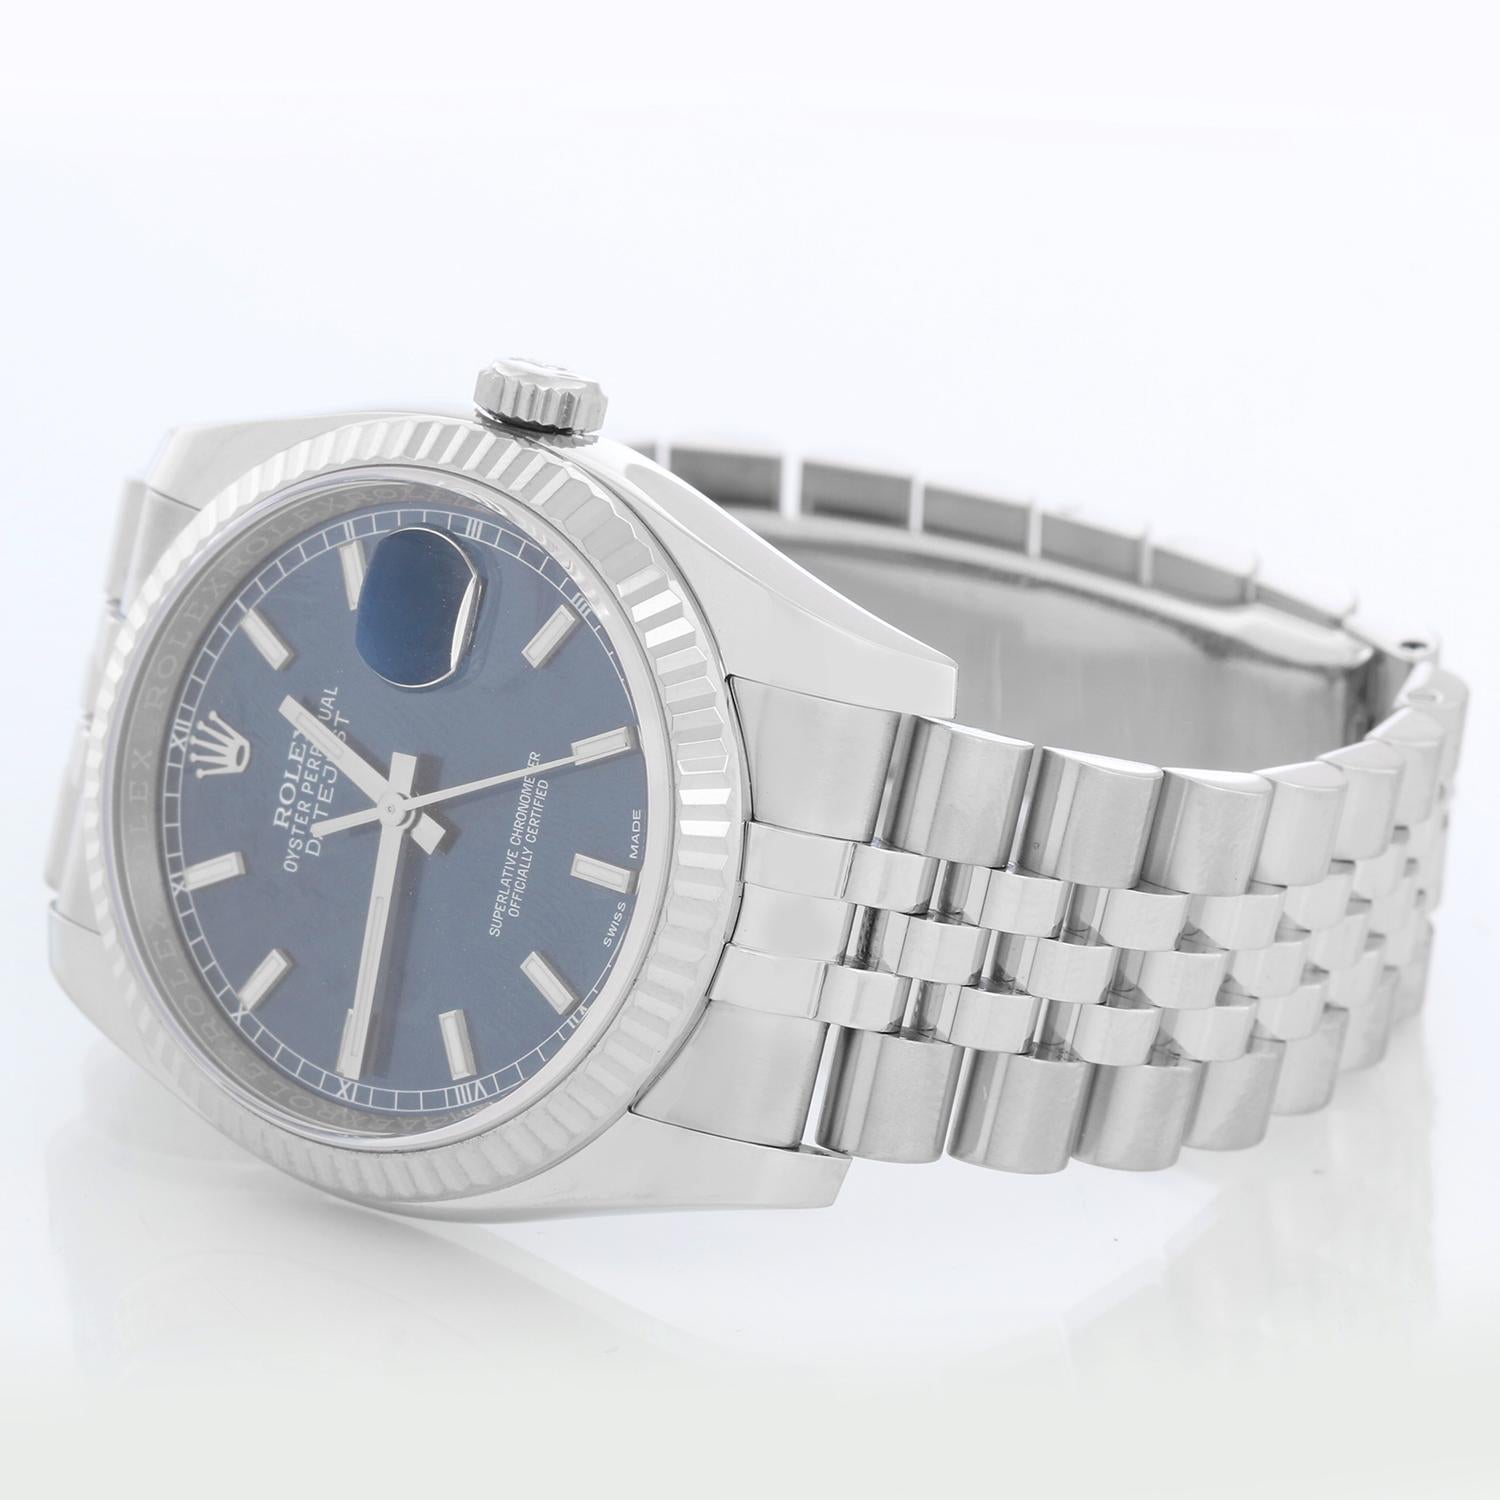 Rolex Datejust Men's Stainless Steel Watch 116234 - Automatic winding, 31 jewels, Quickset, sapphire crystal. Stainless steel case with 18k white gold fluted bezel ( 36 mm ). Blue dial with stick hour markers. Stainless steel Jubilee bracelet.